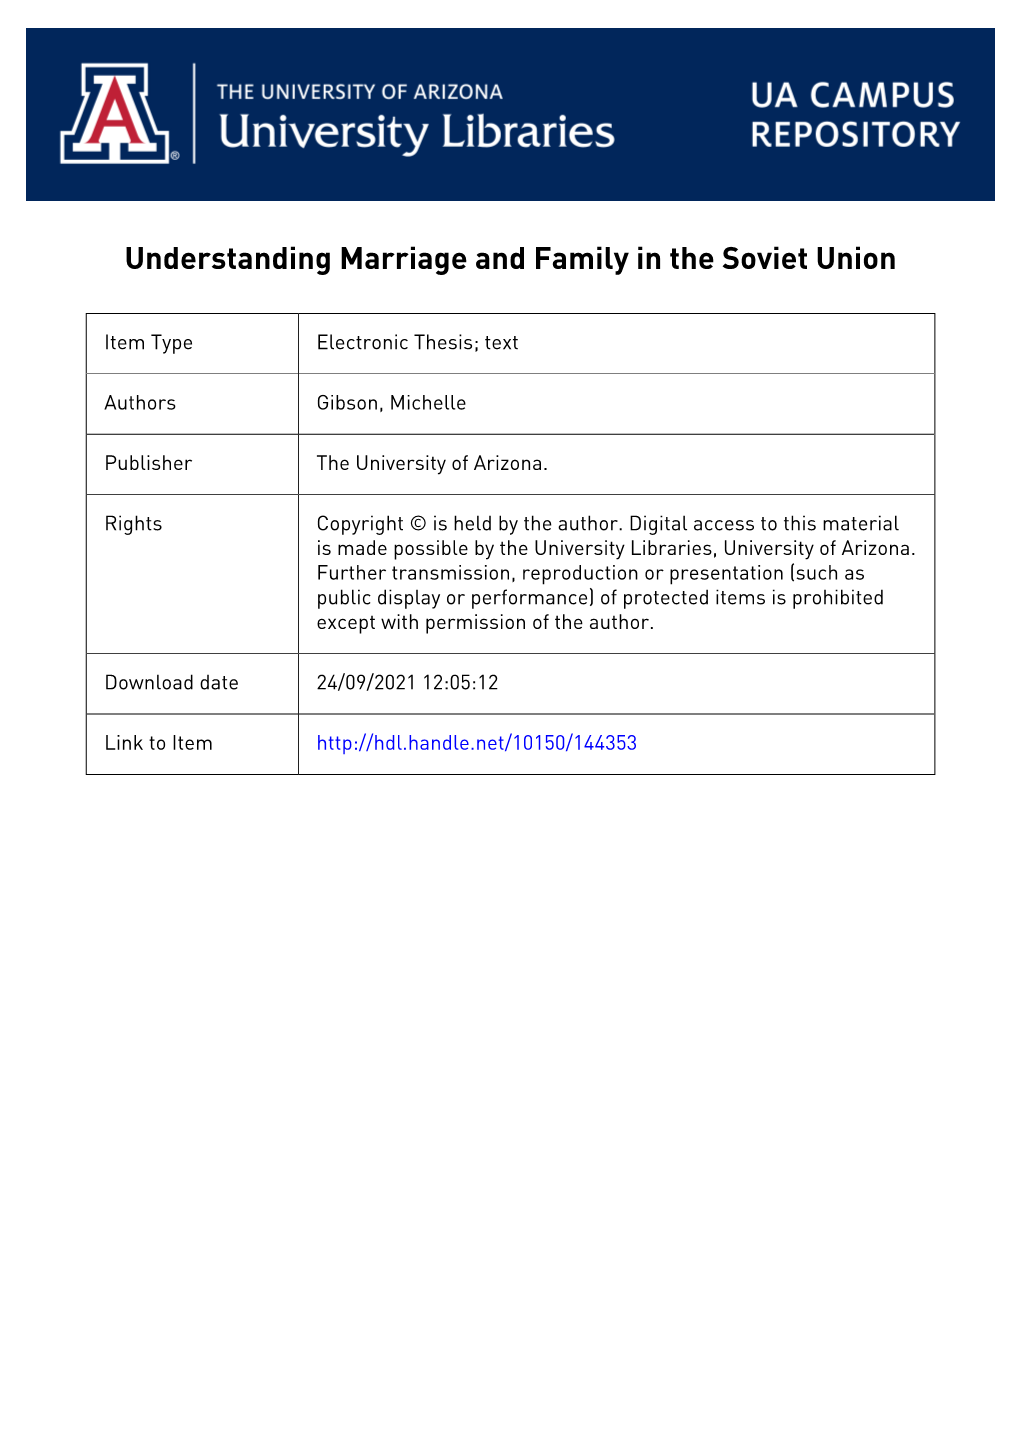 Understanding the Transformation of Marriage in the Soviet Union